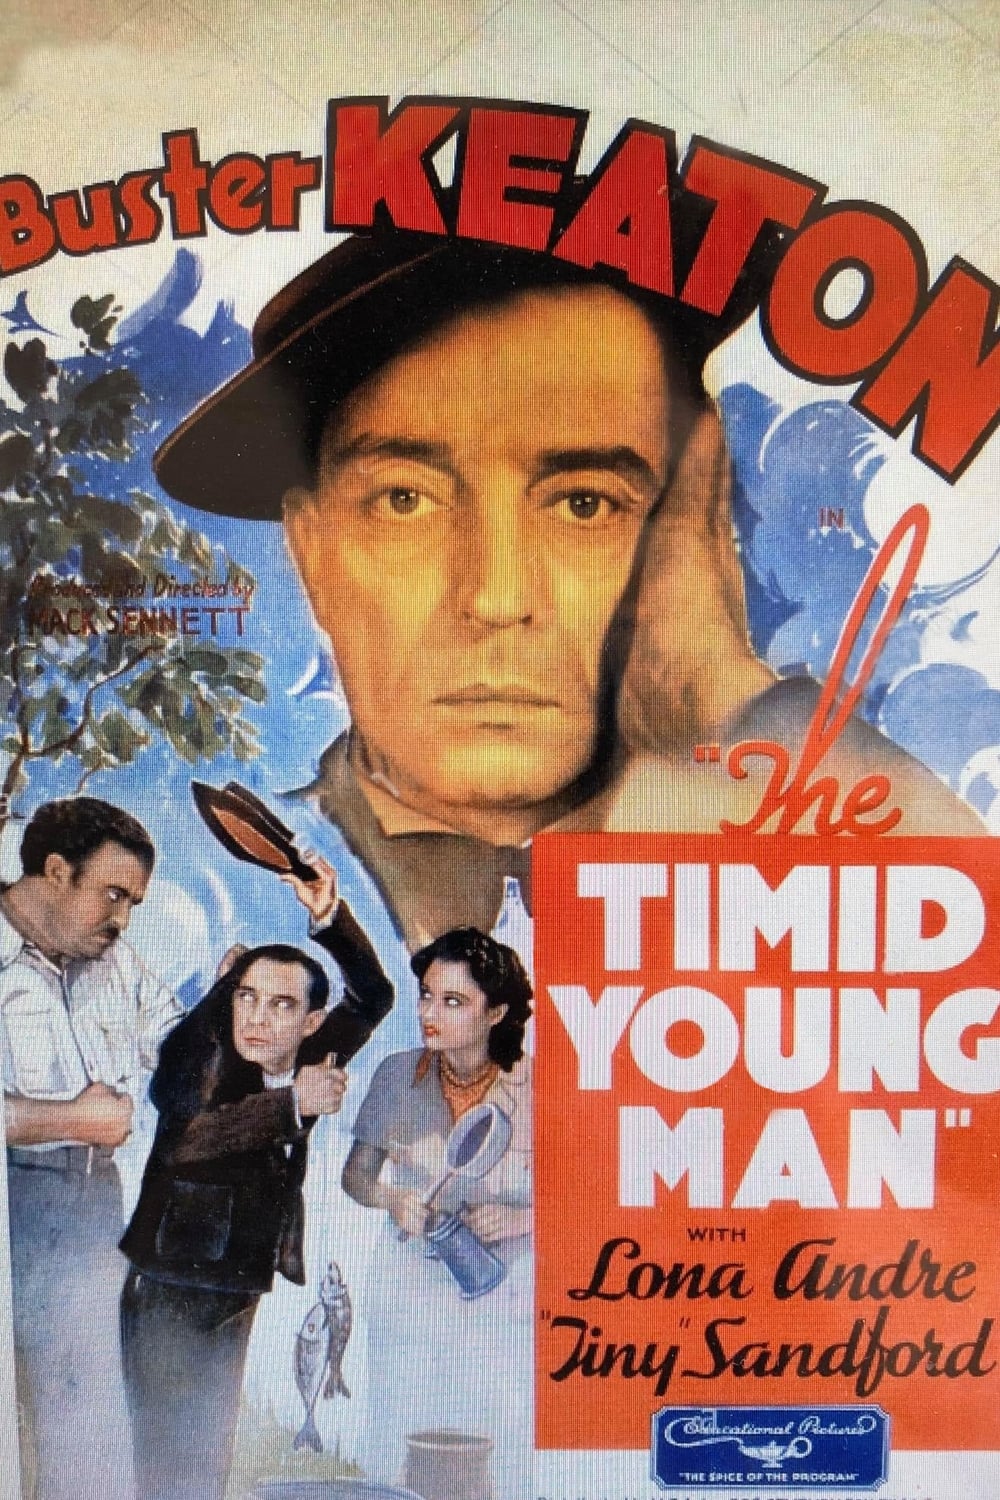 The Timid Young Man (1935)